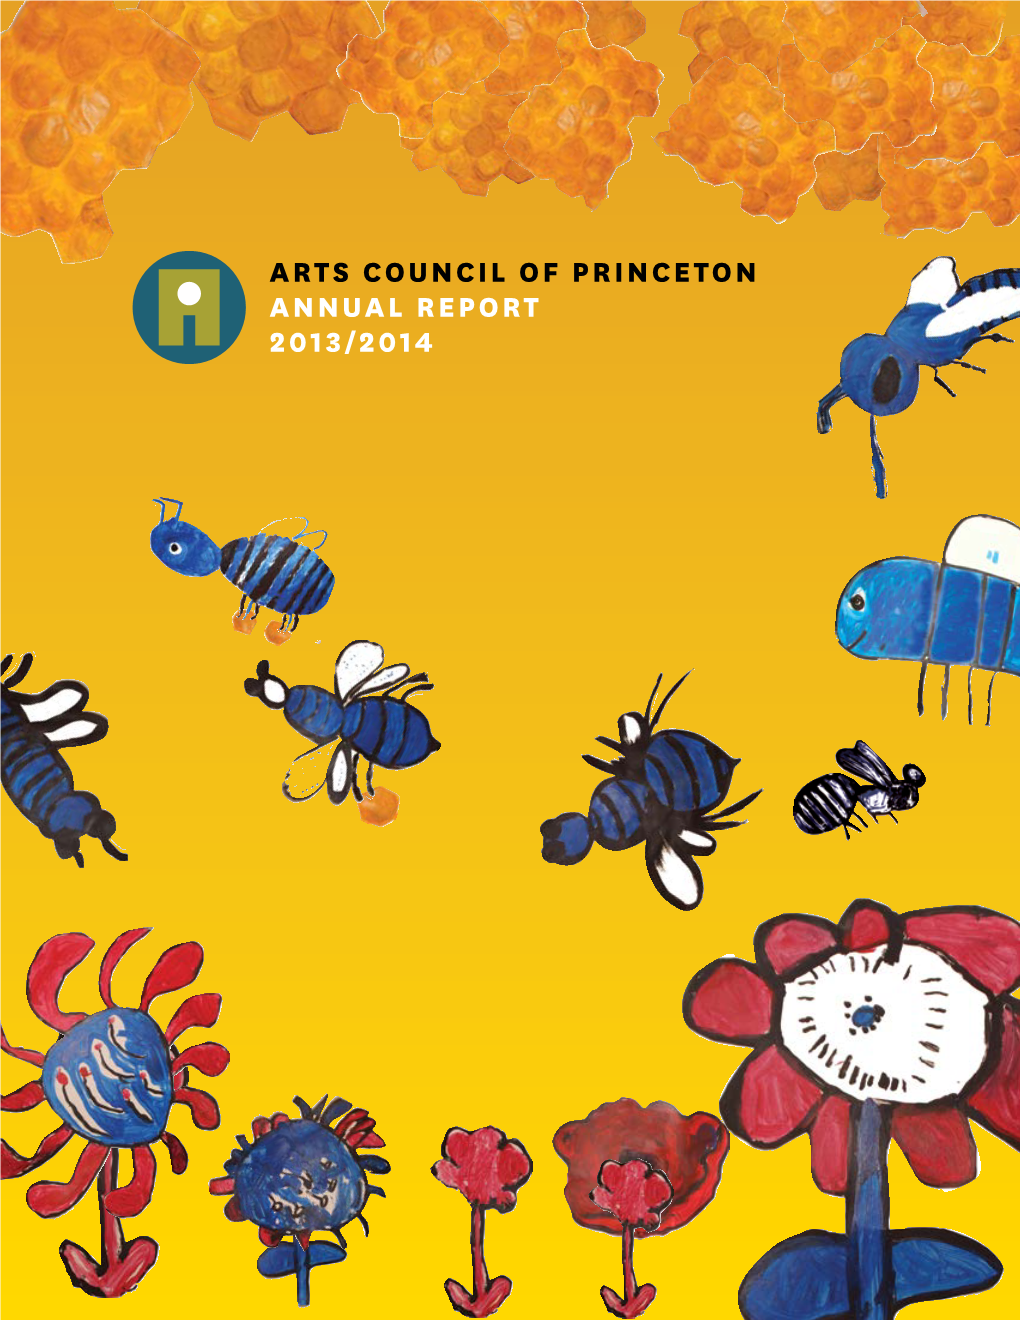 Arts Council of Princeton Annual Report 2013/2014